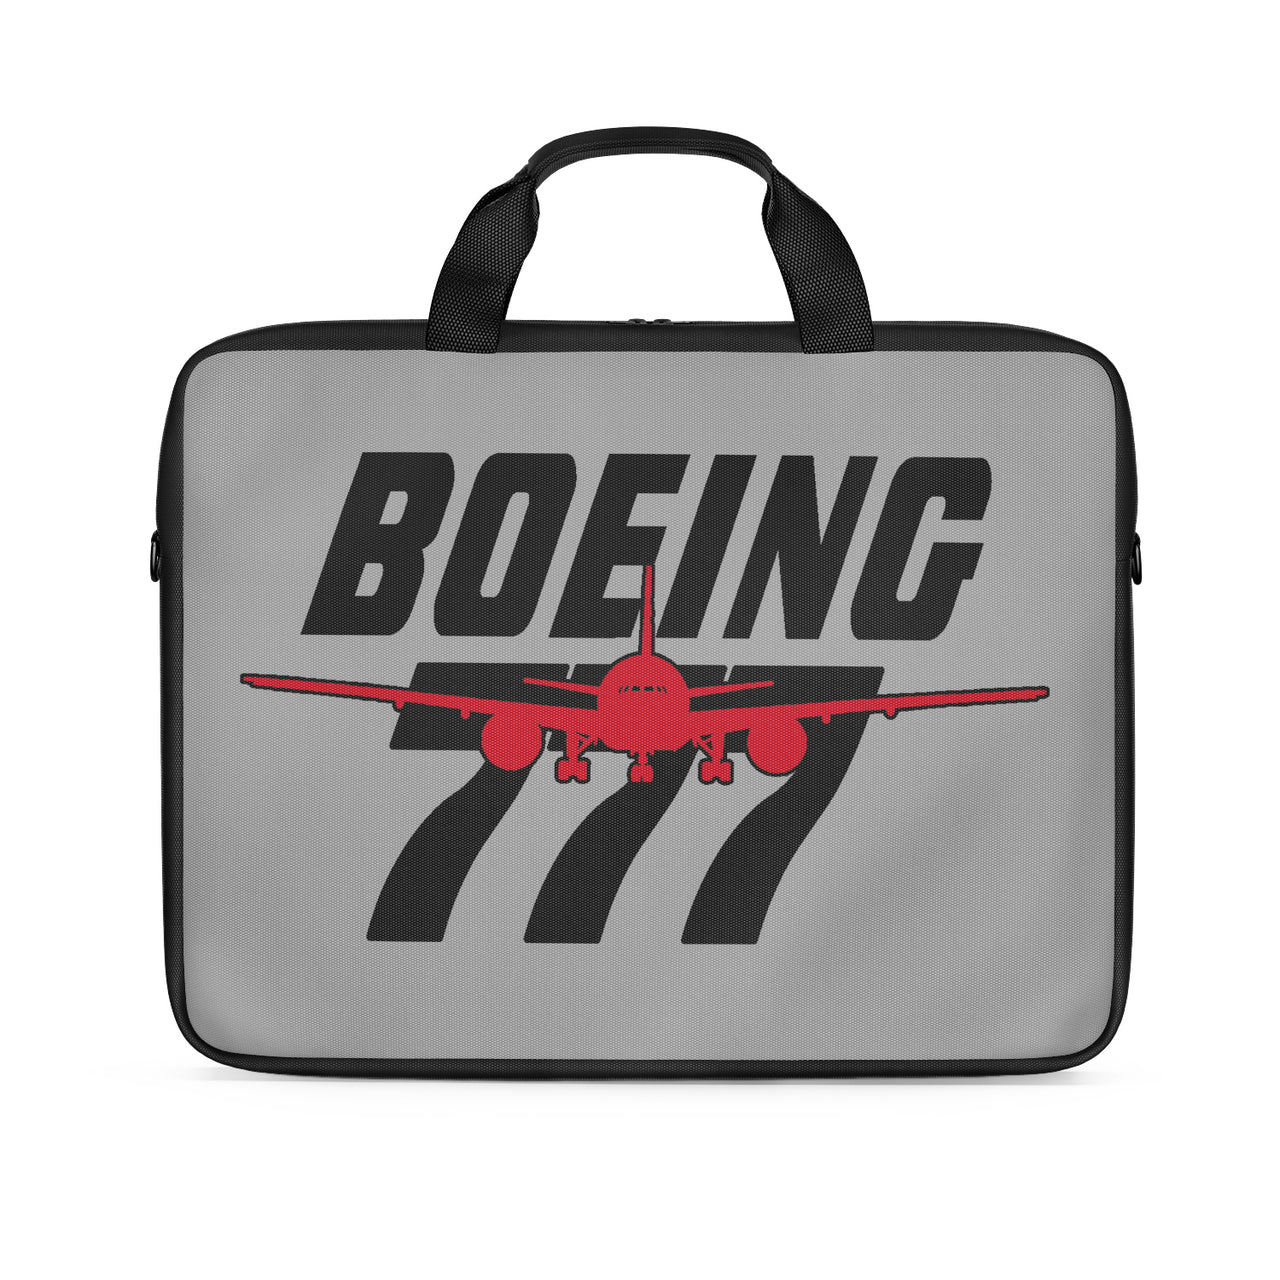 Amazing Boeing 777 Designed Laptop & Tablet Bags